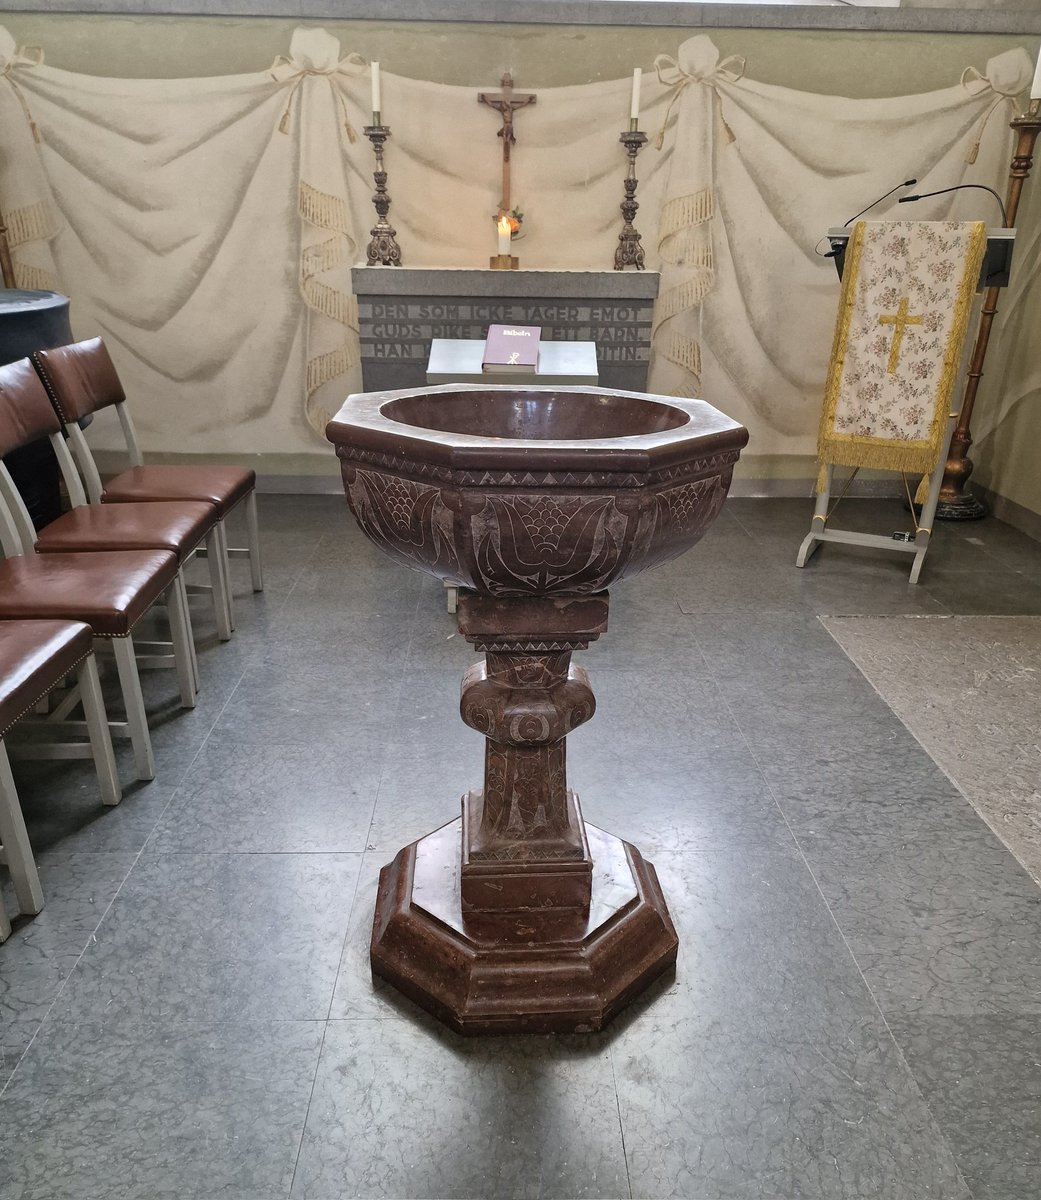 A rather delicate #FontsOnFriday from the Hedvig Eleonora church in #Stockholm, presumably dating from the early C18th, the church begun in the late C17th, and consecrated in 1737. Is it made of granite? Love the tulips around the bowl - bit late for tulipomania?